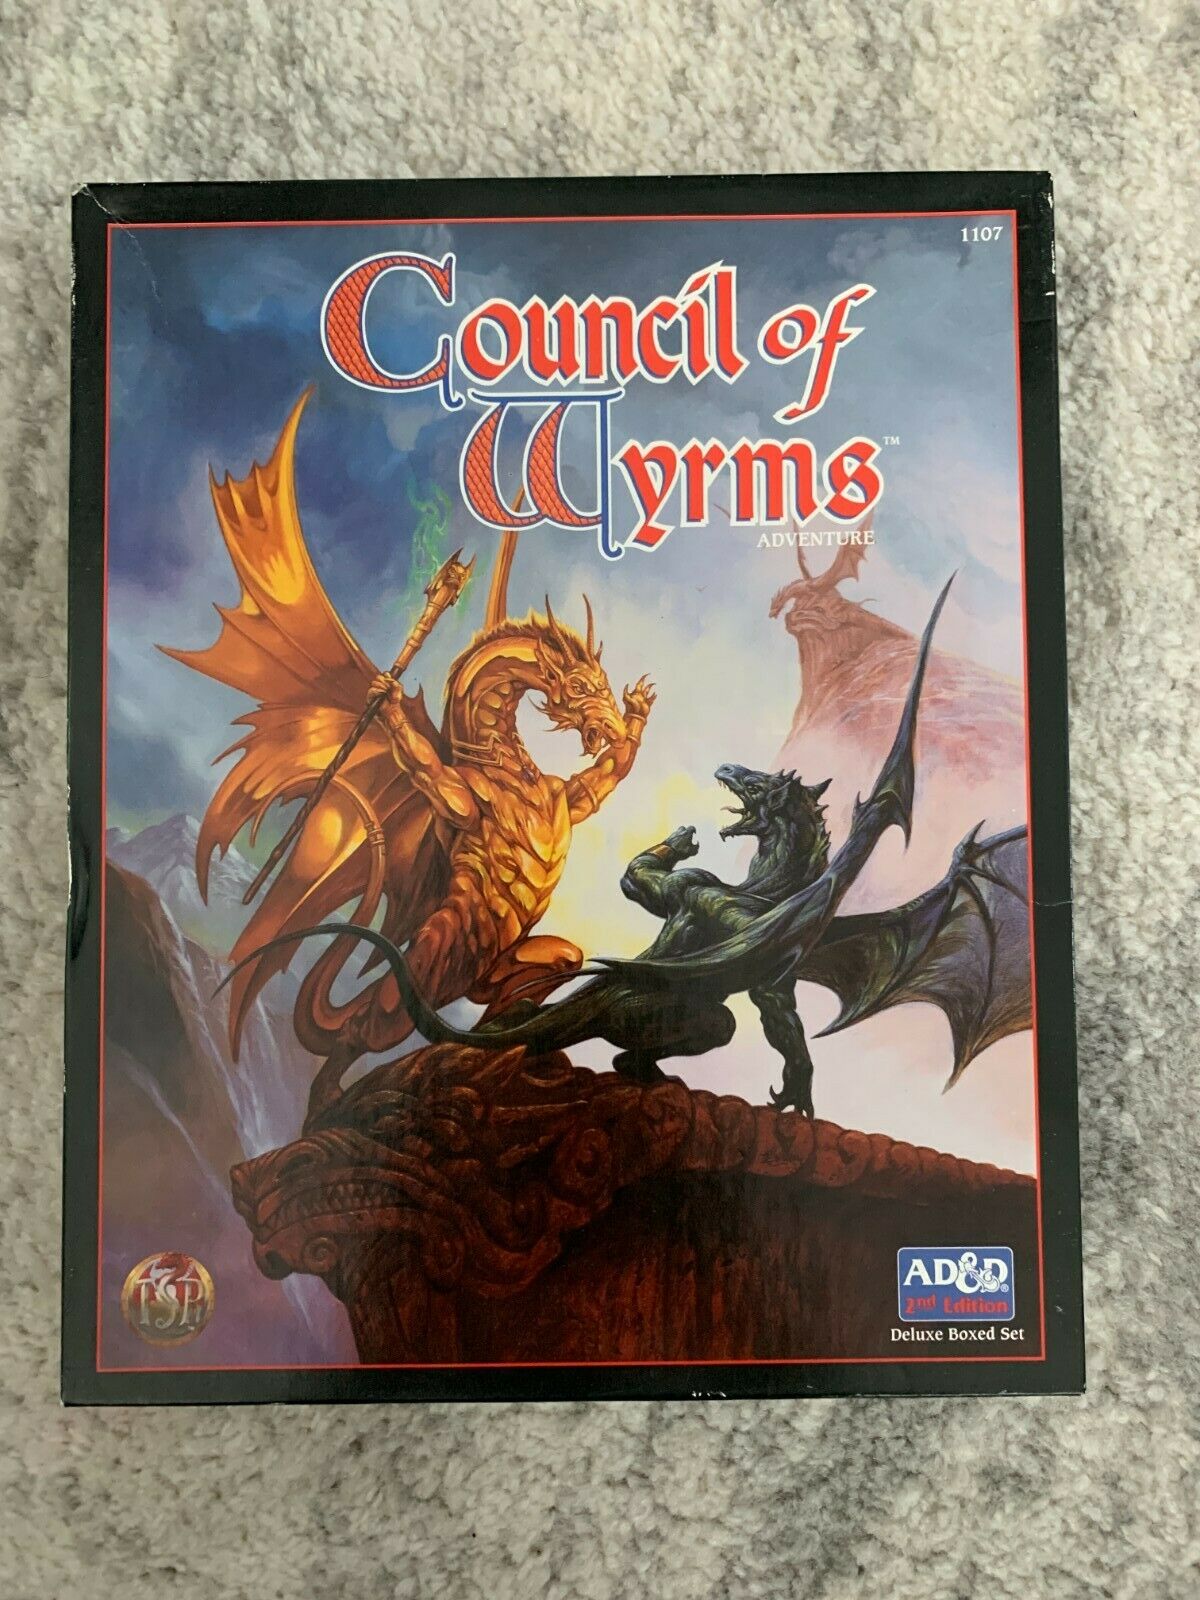 Advanced Dungeons & Dragons Council Of Wyrms Complete Boxed Set (excellent)